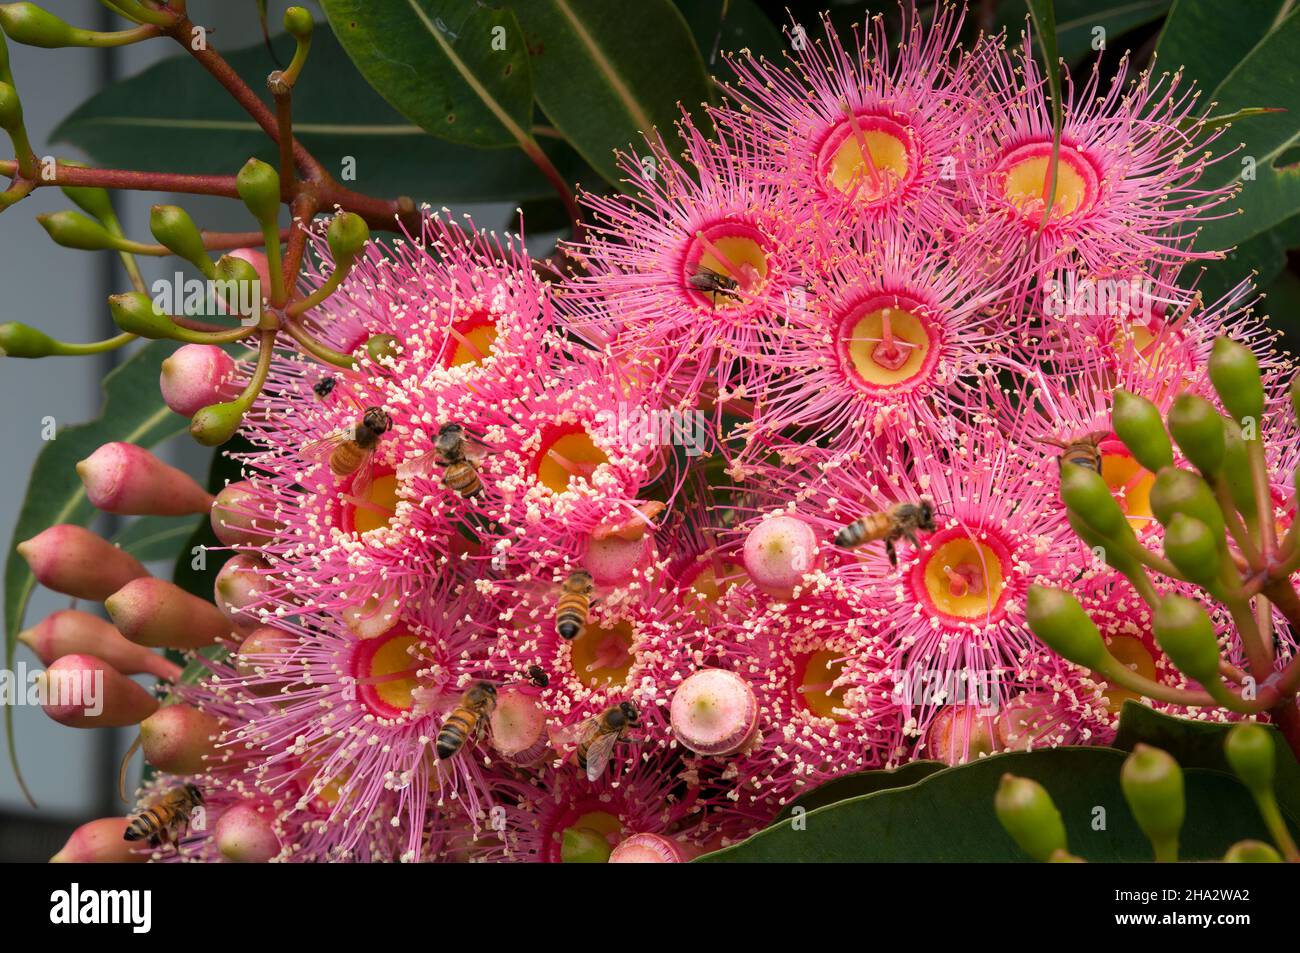 Sydney Australia, branch of pink flowers of an Australian native flowering gum tree with bees Stock Photo